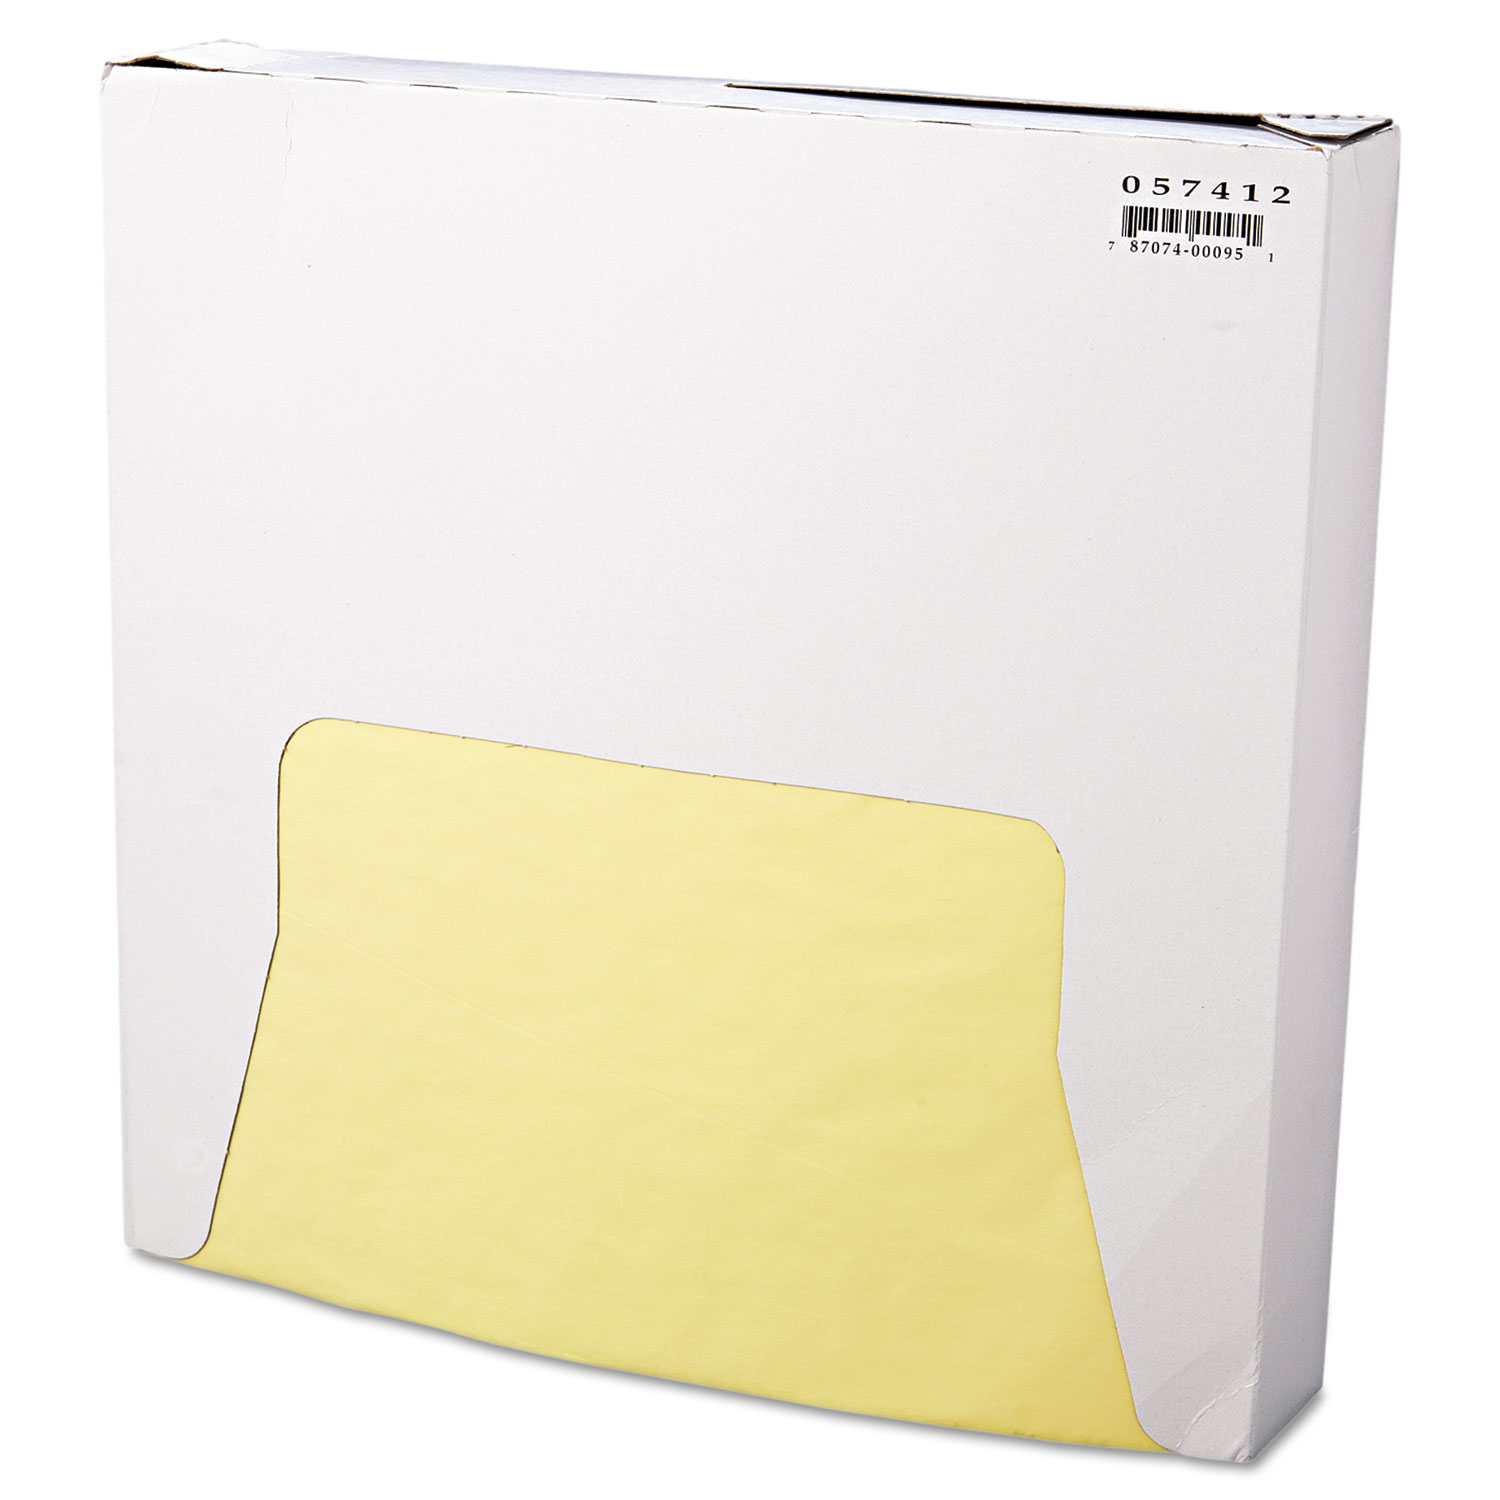  Bagcraft P057412 Grease-Resistant Paper Wraps and Liners, 12 x 12, Yellow, 1000/Box, 5 Boxes/Carton (BGC057412) 